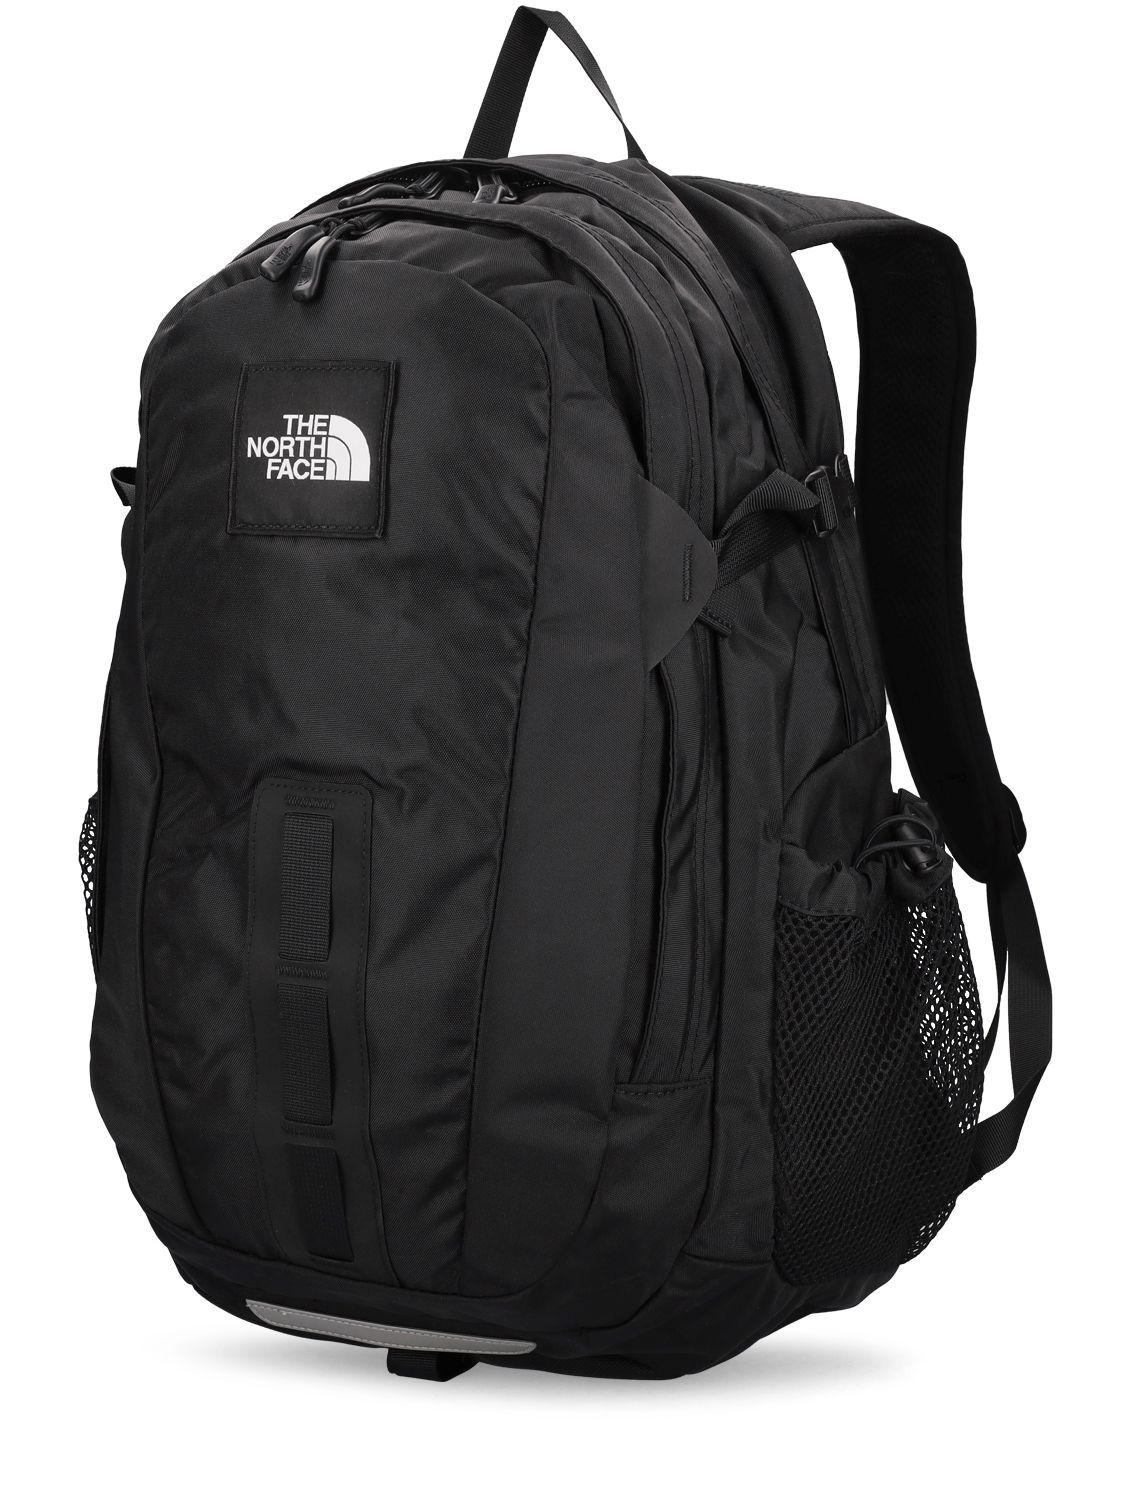 The North Face 30l Hot Shot Backpack in Black | Lyst